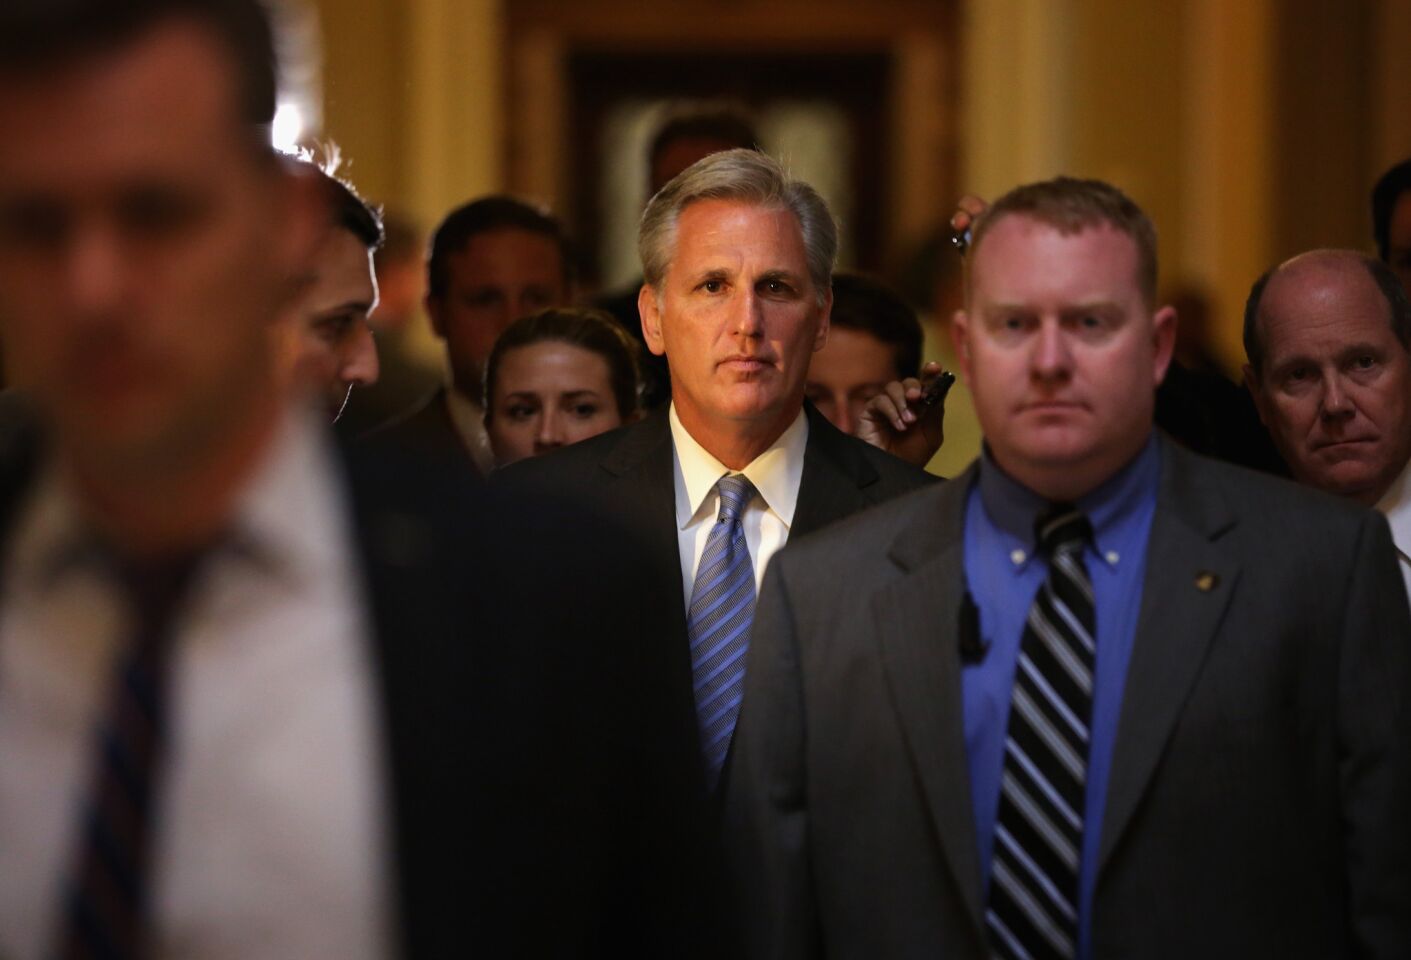 Kevin McCarthy becomes House Majority Leader